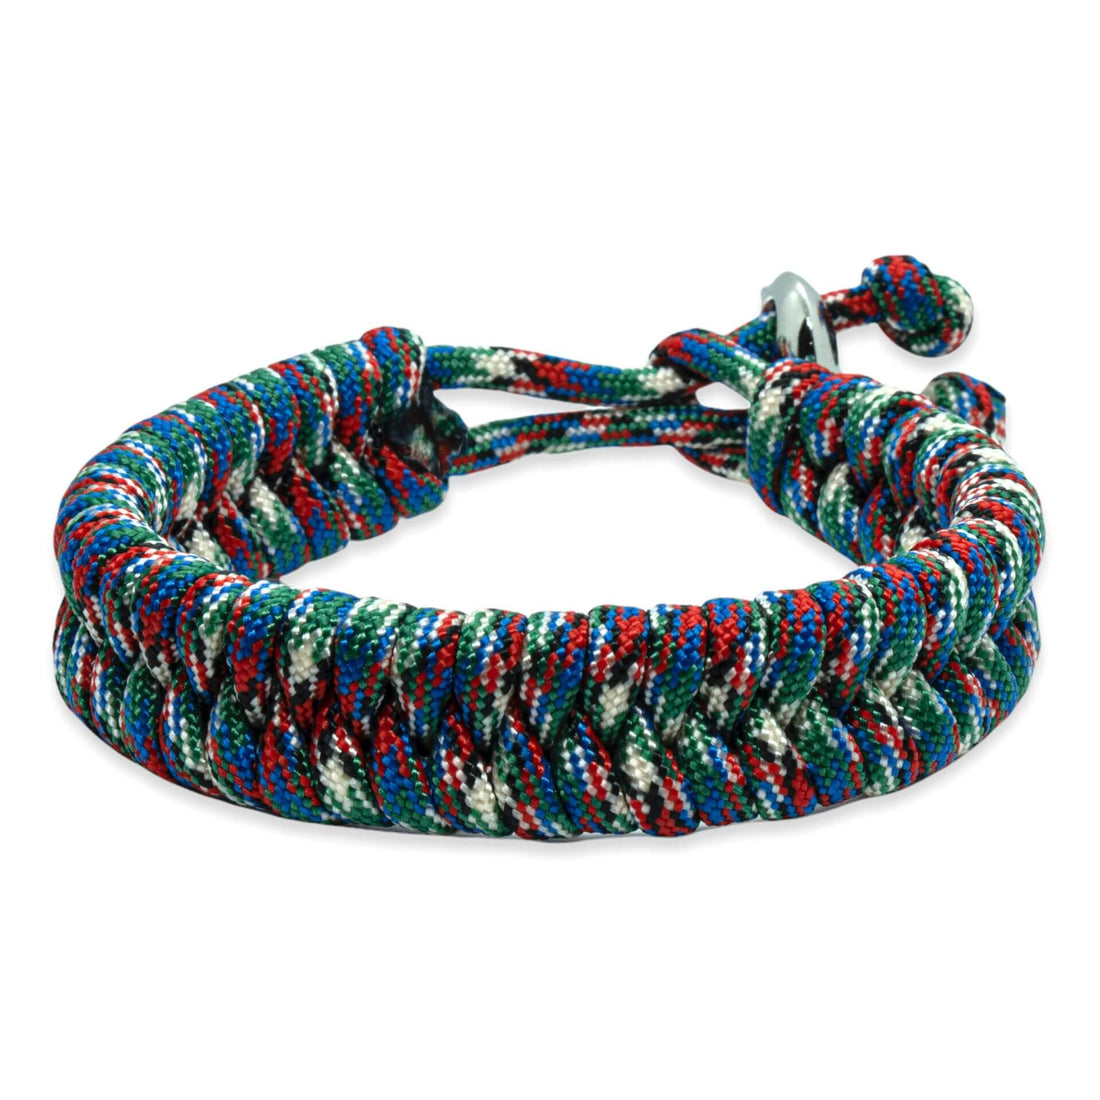 Swedish tail bracelet - Green blue red white rope color